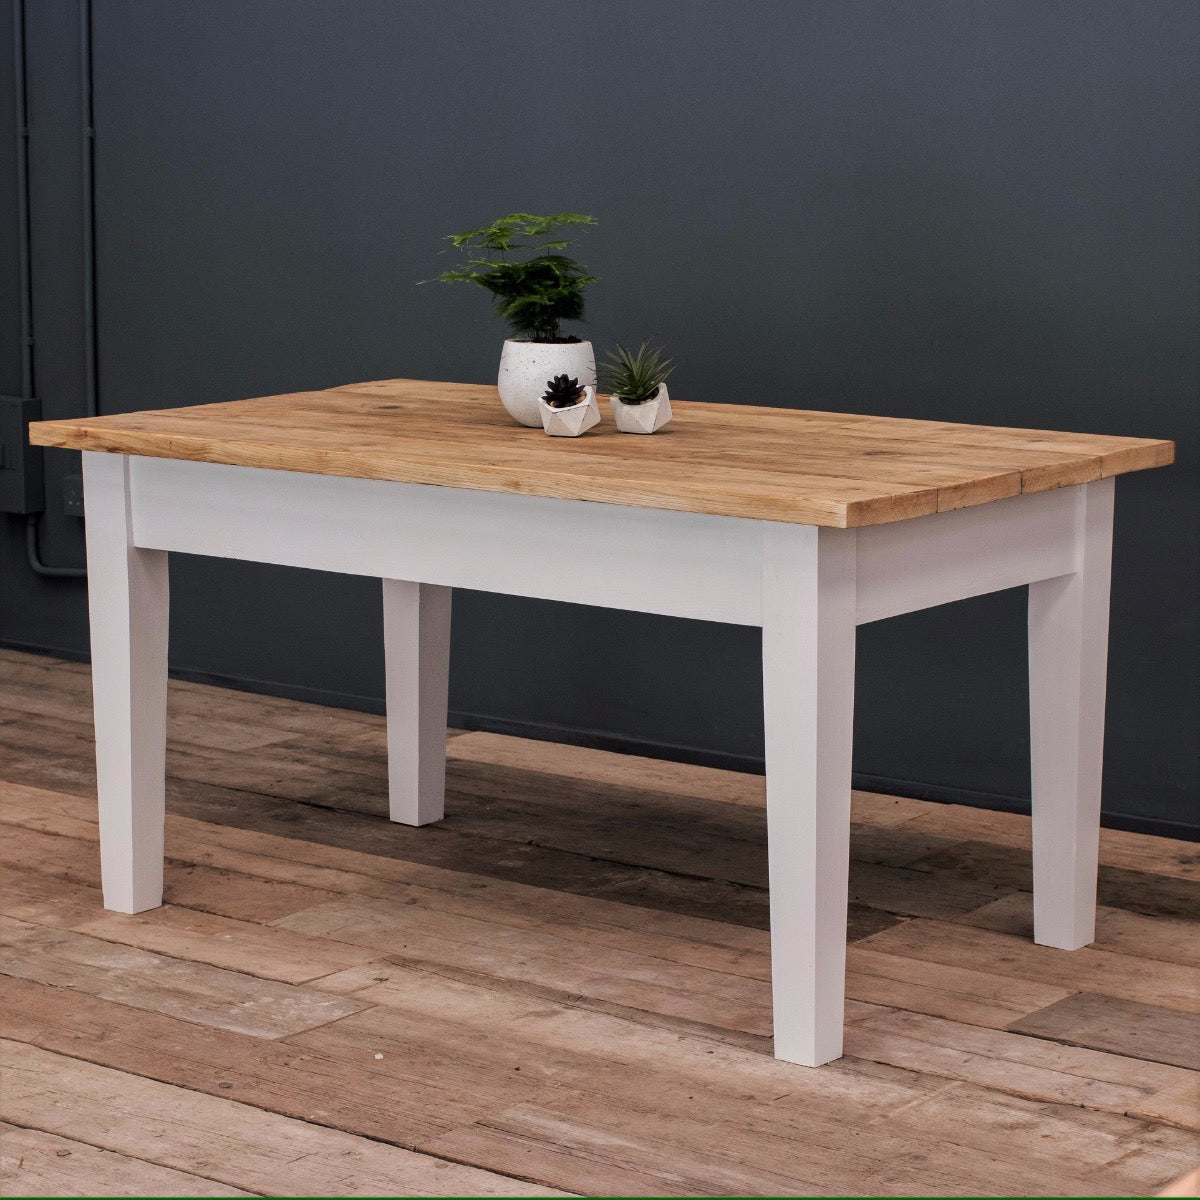 4ft Oak Farmhouse Kitchen Table with Tapered Legs